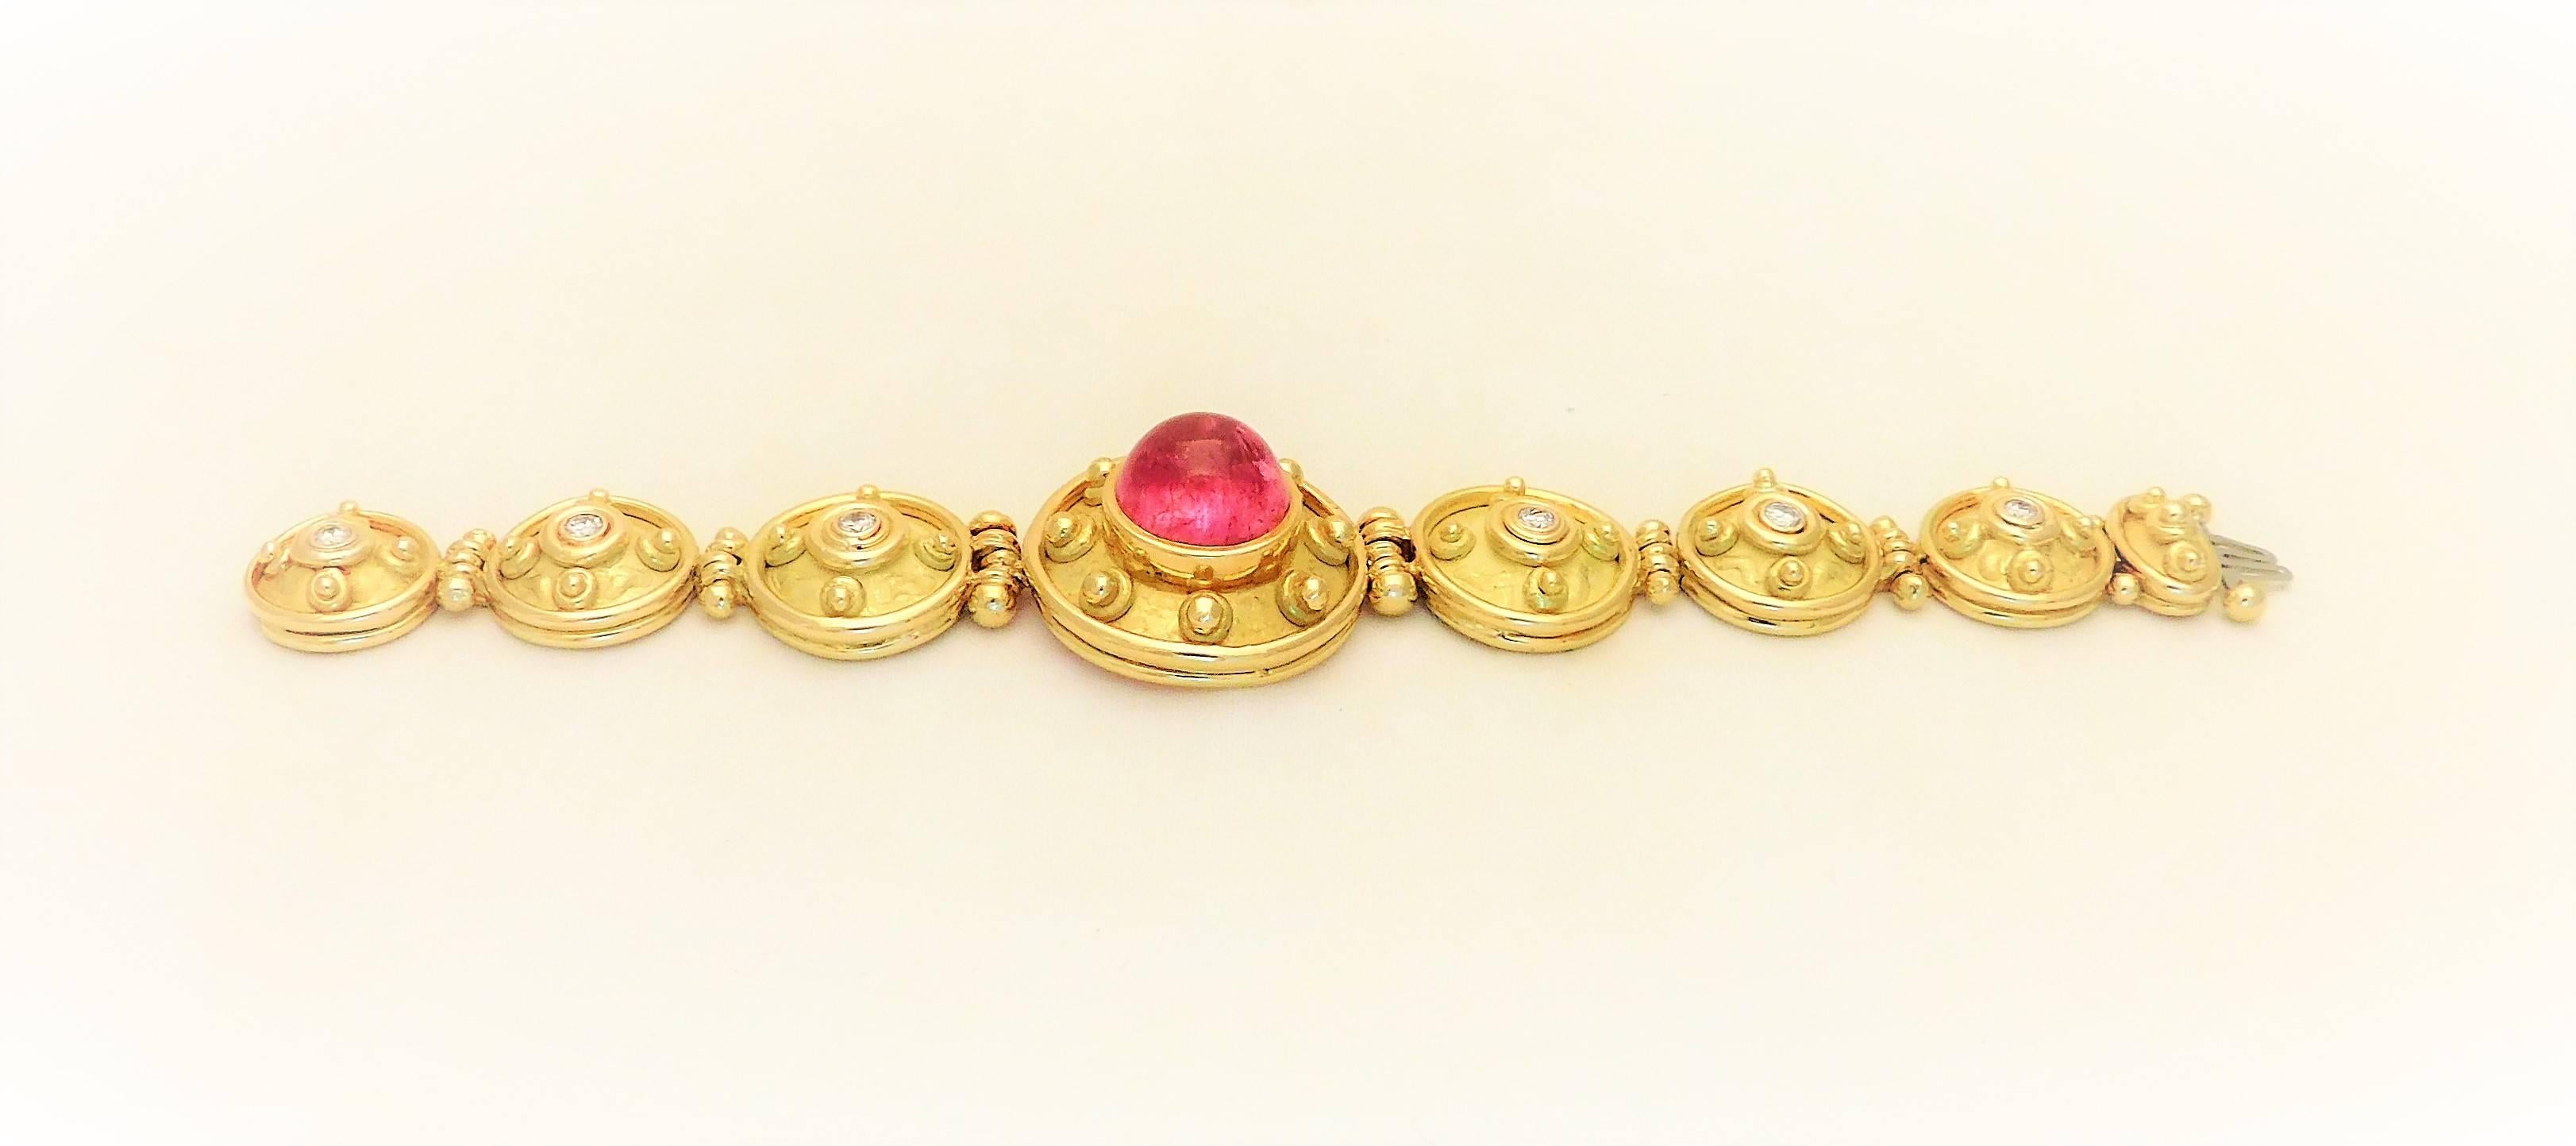 Denise Roberge is a world class jewelry and art designer based in Palm Desert California.  

From an exquisite estate.  Circa late 20th century.  This ornate bracelet has been hand crafted in solid 18k yellow gold. The heavy flexible bracelet is